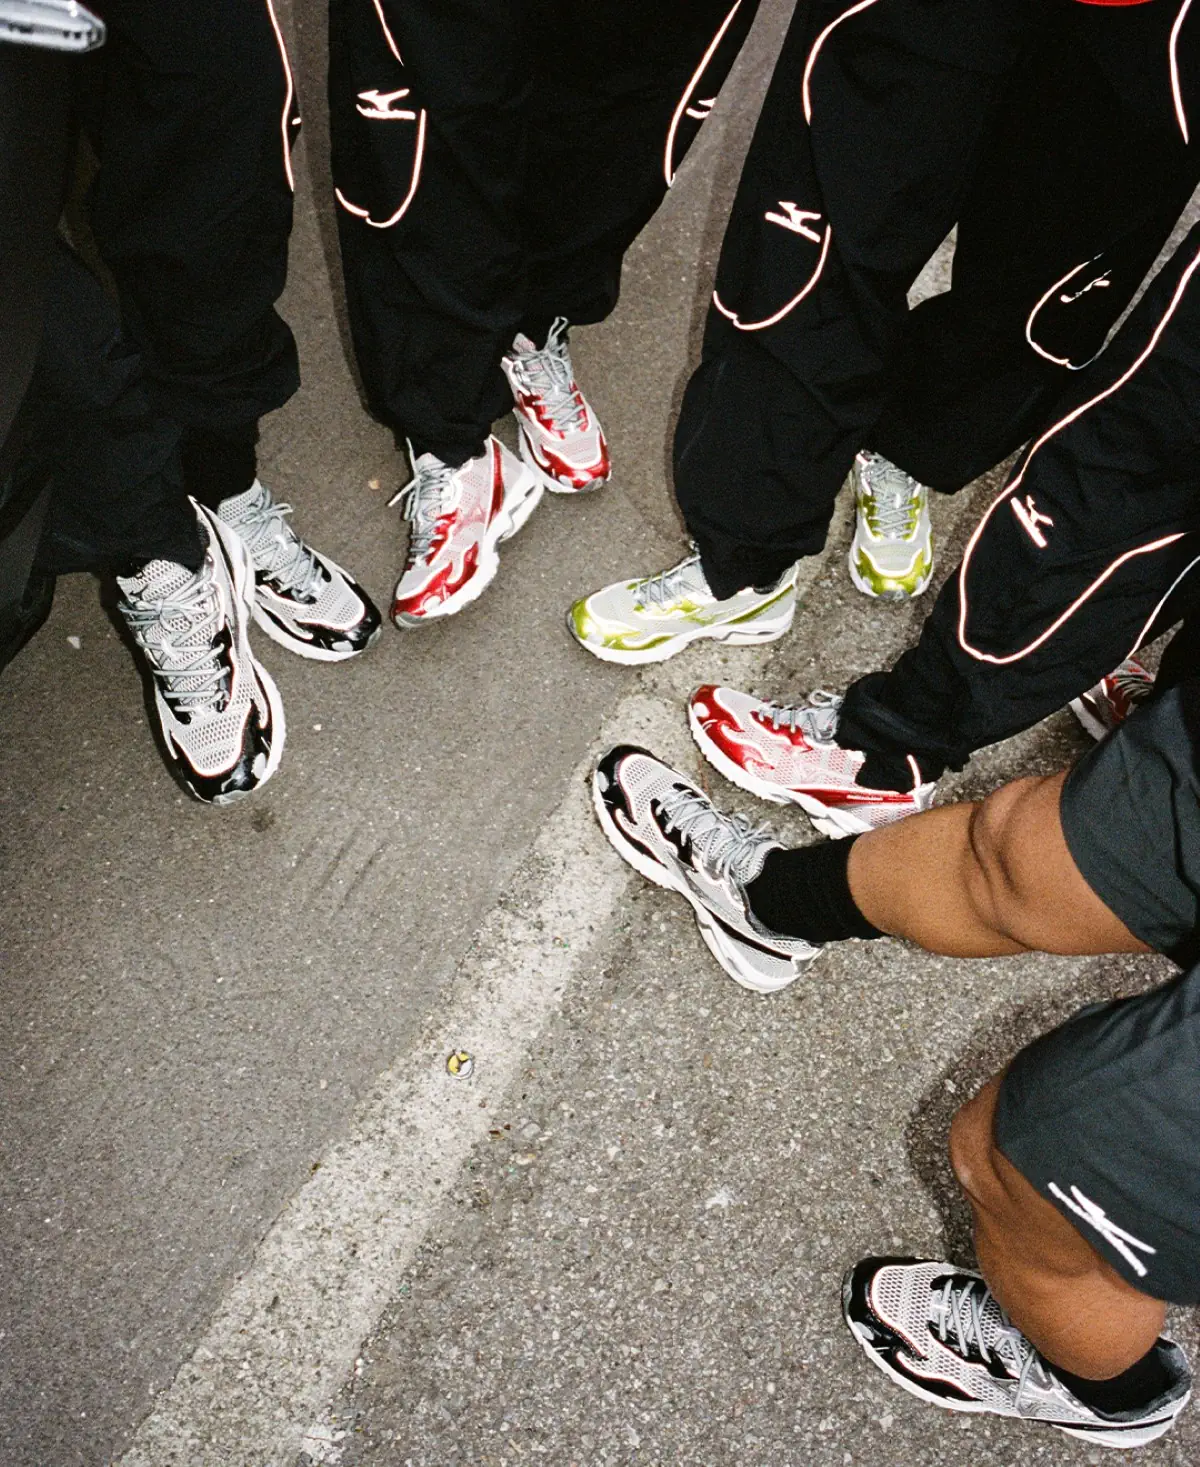 Mizuno and One Block Down Unite for the "Flame Wave" Sneaker Reveal